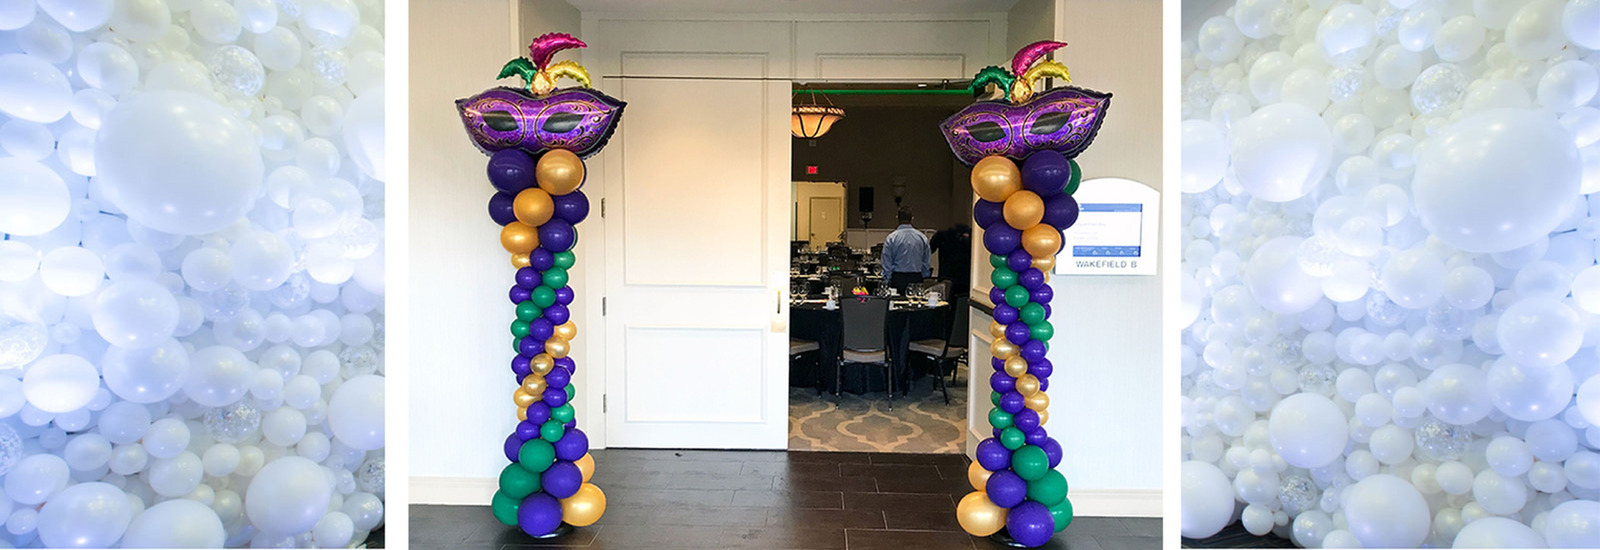 Purple, Green and Gold Graduated Balloon Columns with a spiral pattern and Mask foil balloons on top at the entry to a ballroom in Melbourne Fl